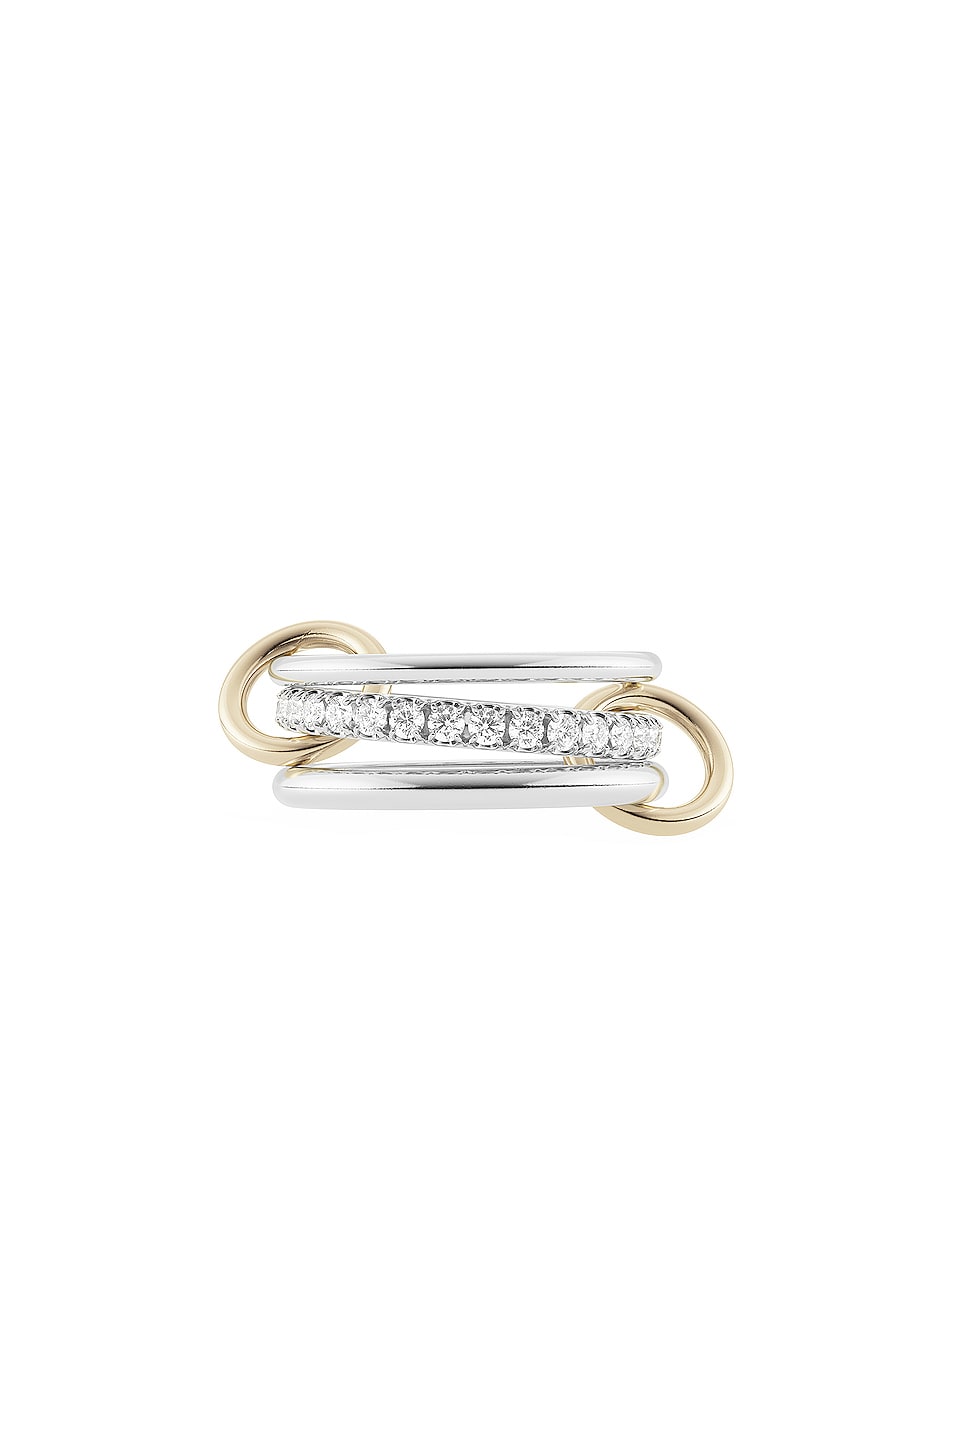 Image 1 of Spinelli Kilcollin Petunia Ring in Sterling Silver, 18K Yellow Gold, & Grey Diamonds